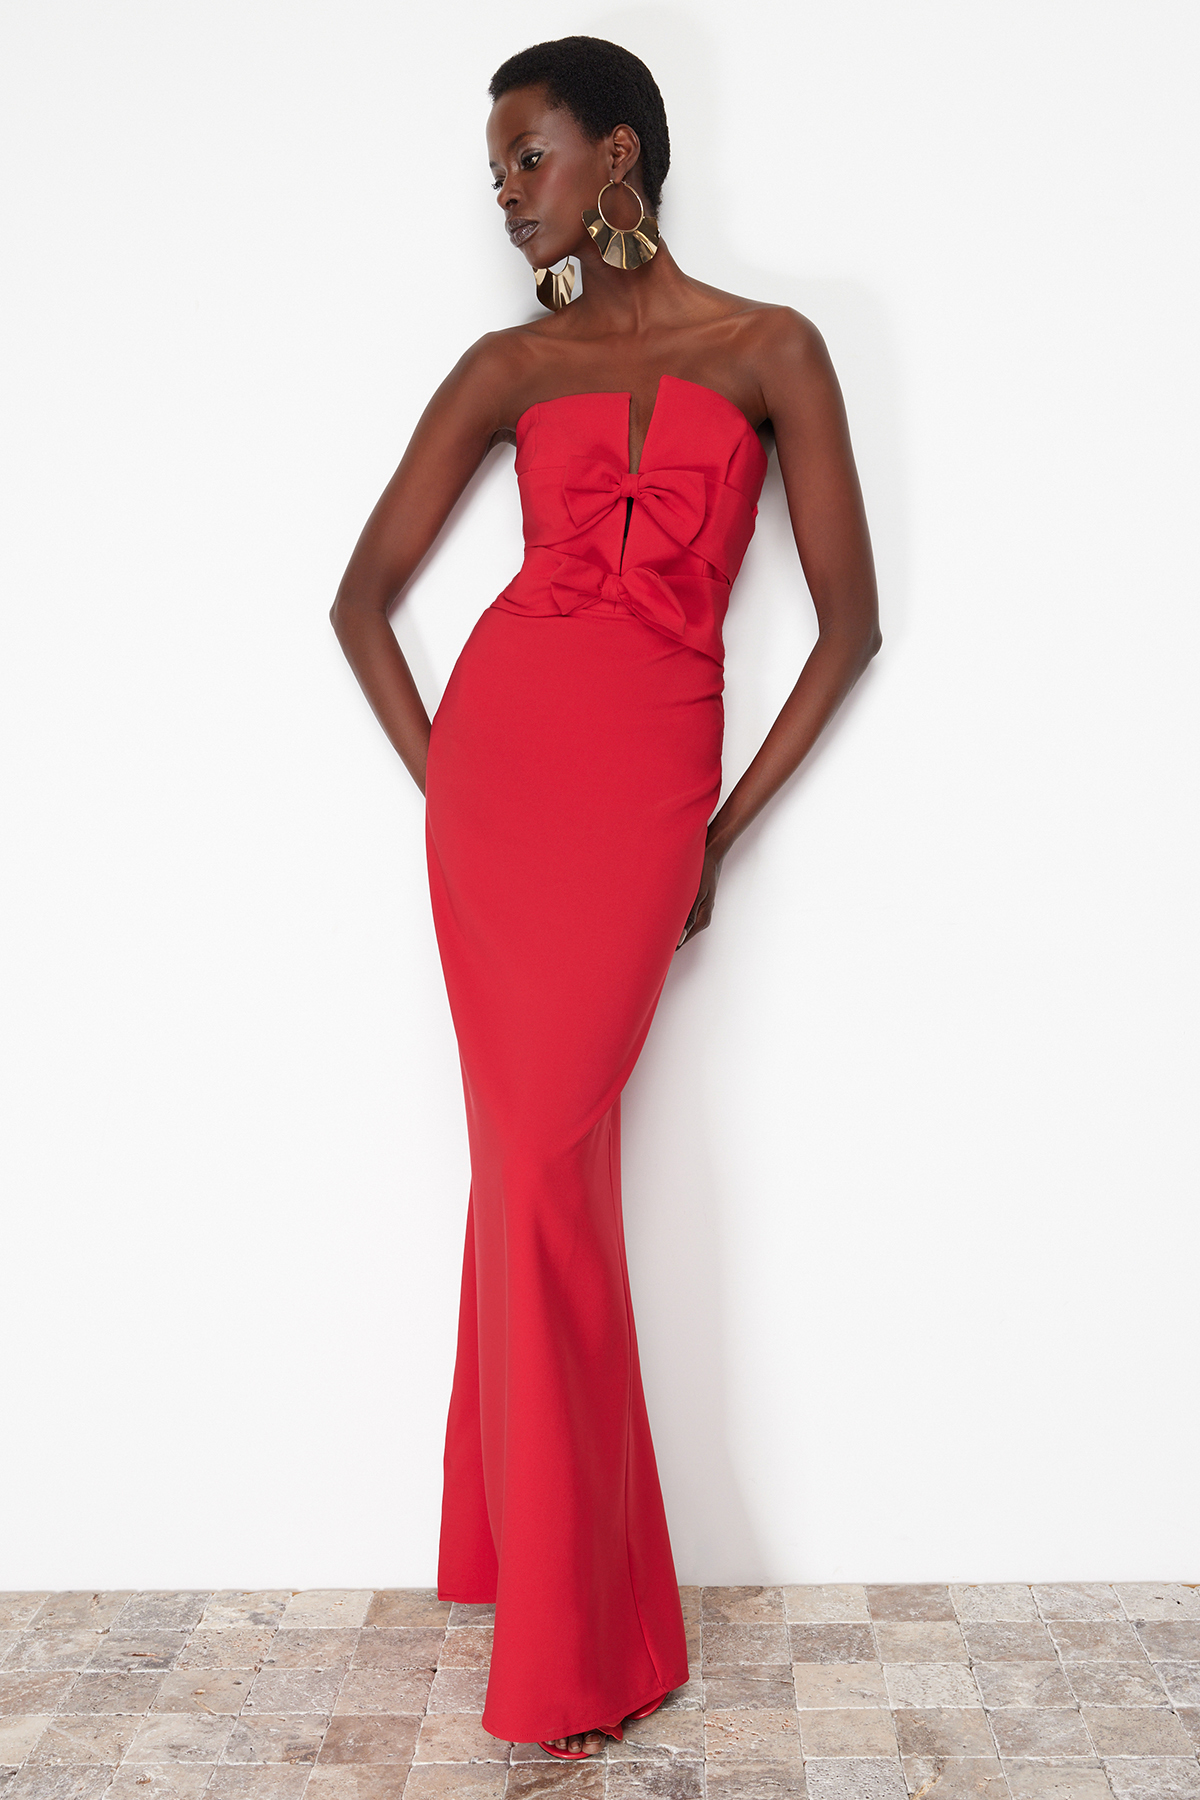 Trendyol Red Bow Detailed Long Evening Evening Dress